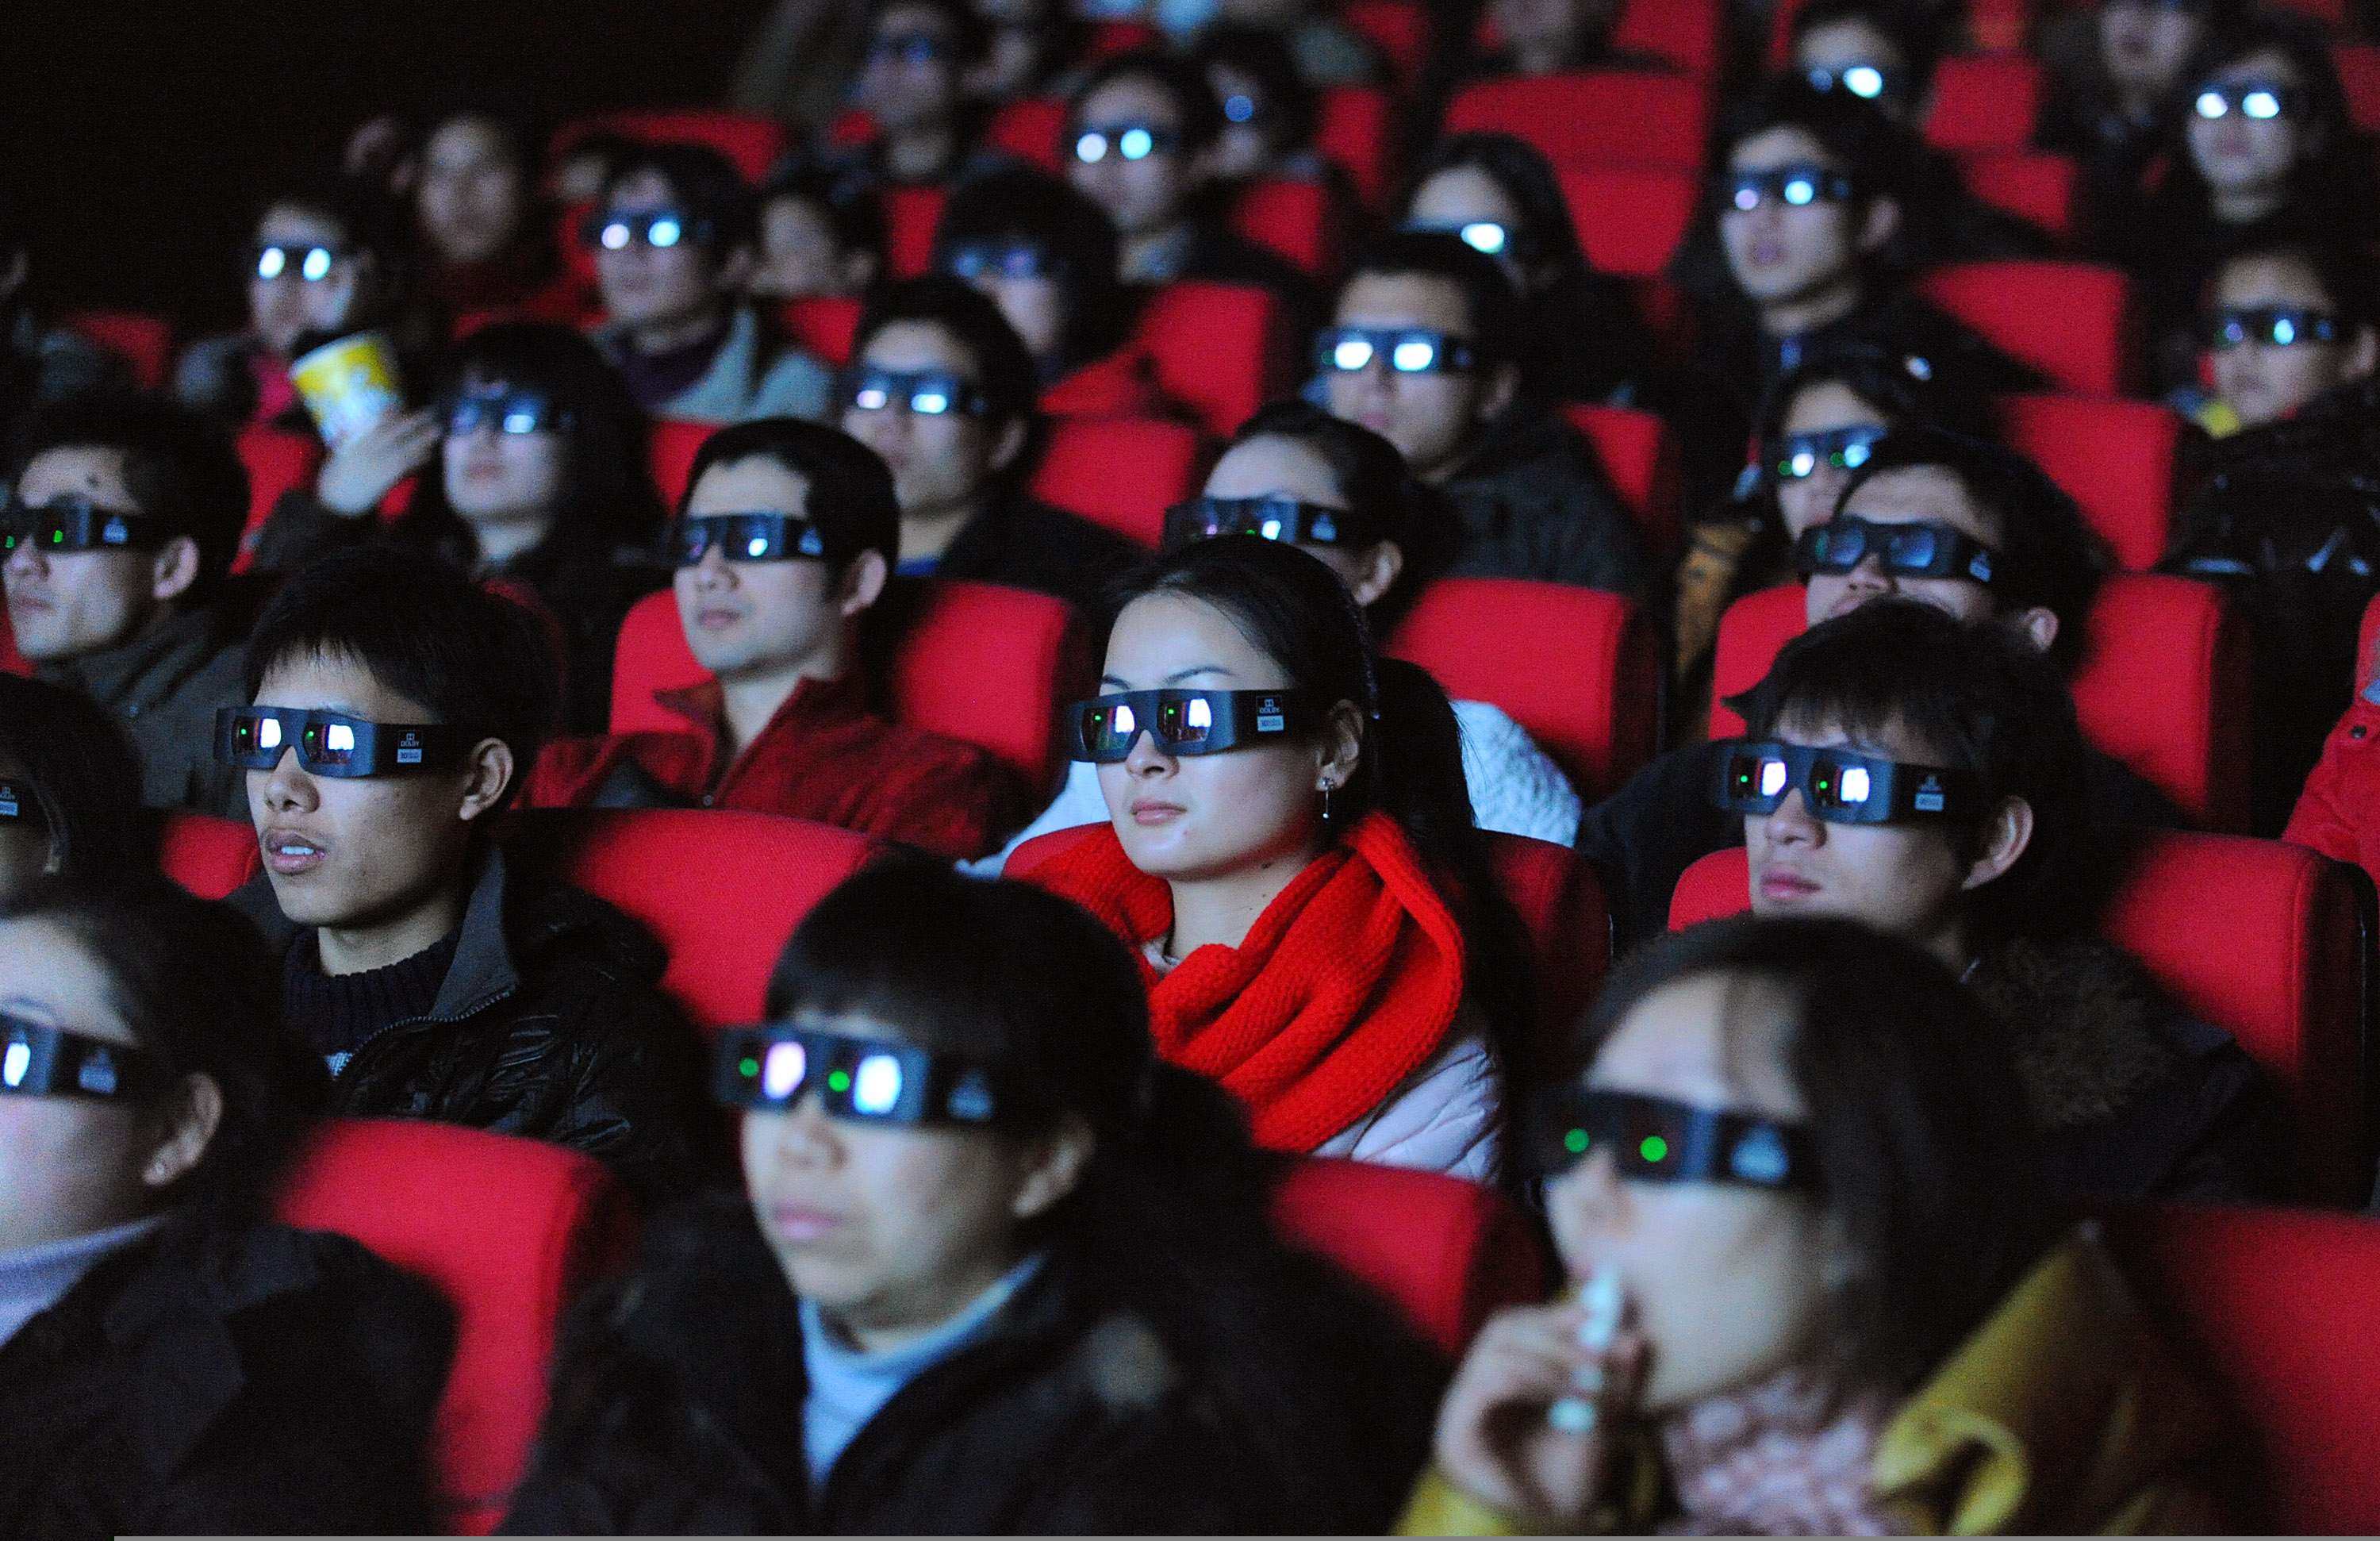 Equipment in China’s cinemas is relatively new and advanced with 86 per cent of screens configured for 3D films. Bloomberg reported in 2015 that around 15 new cinema screens opened in China each day. Photo: AFP